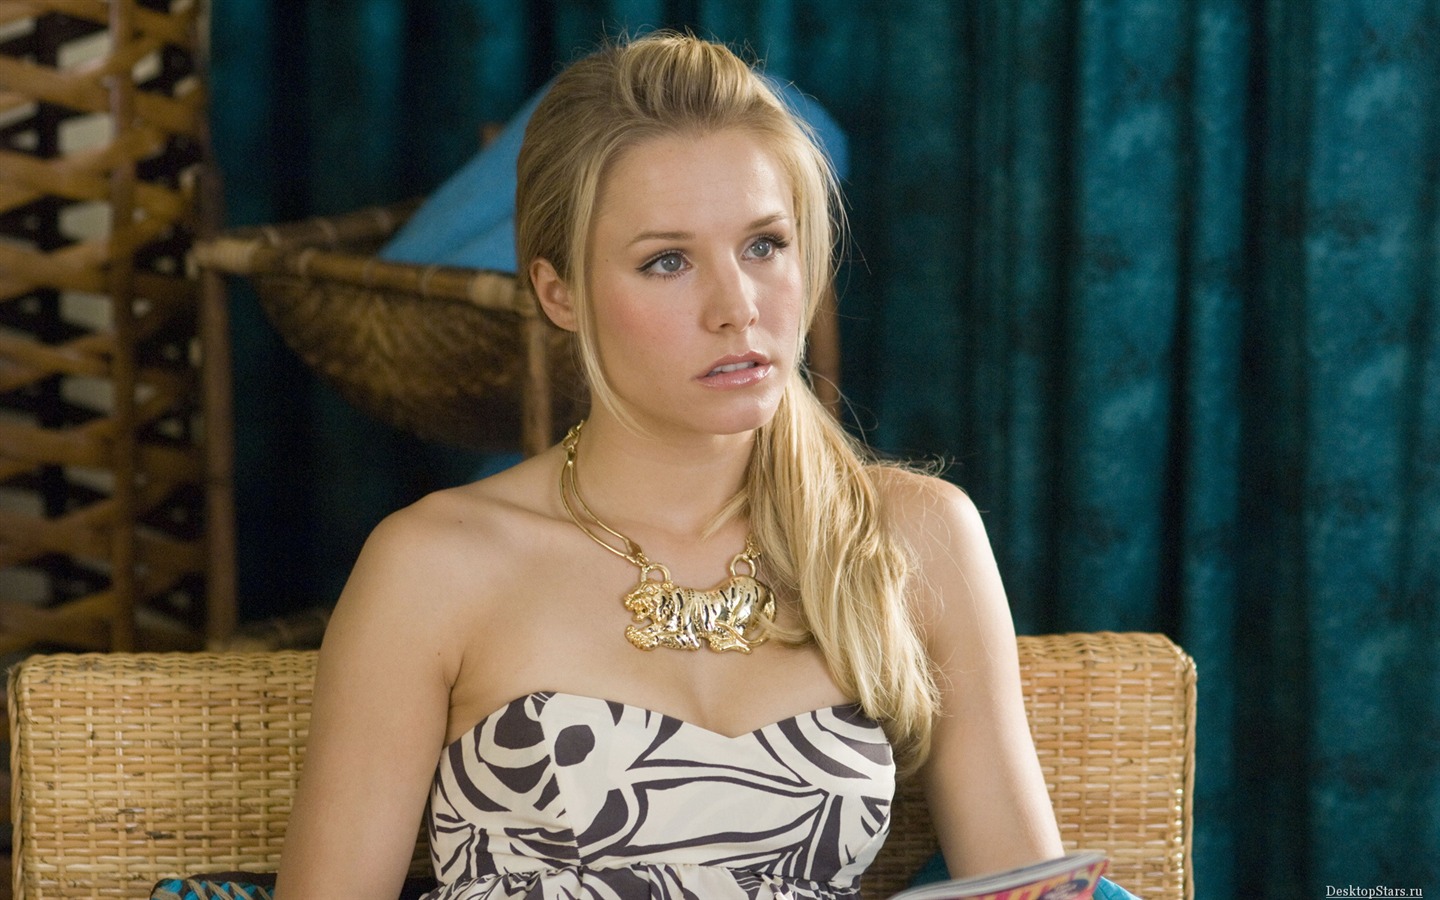 Kristen Bell #007 - 1440x900 Wallpapers Pictures Photos Images